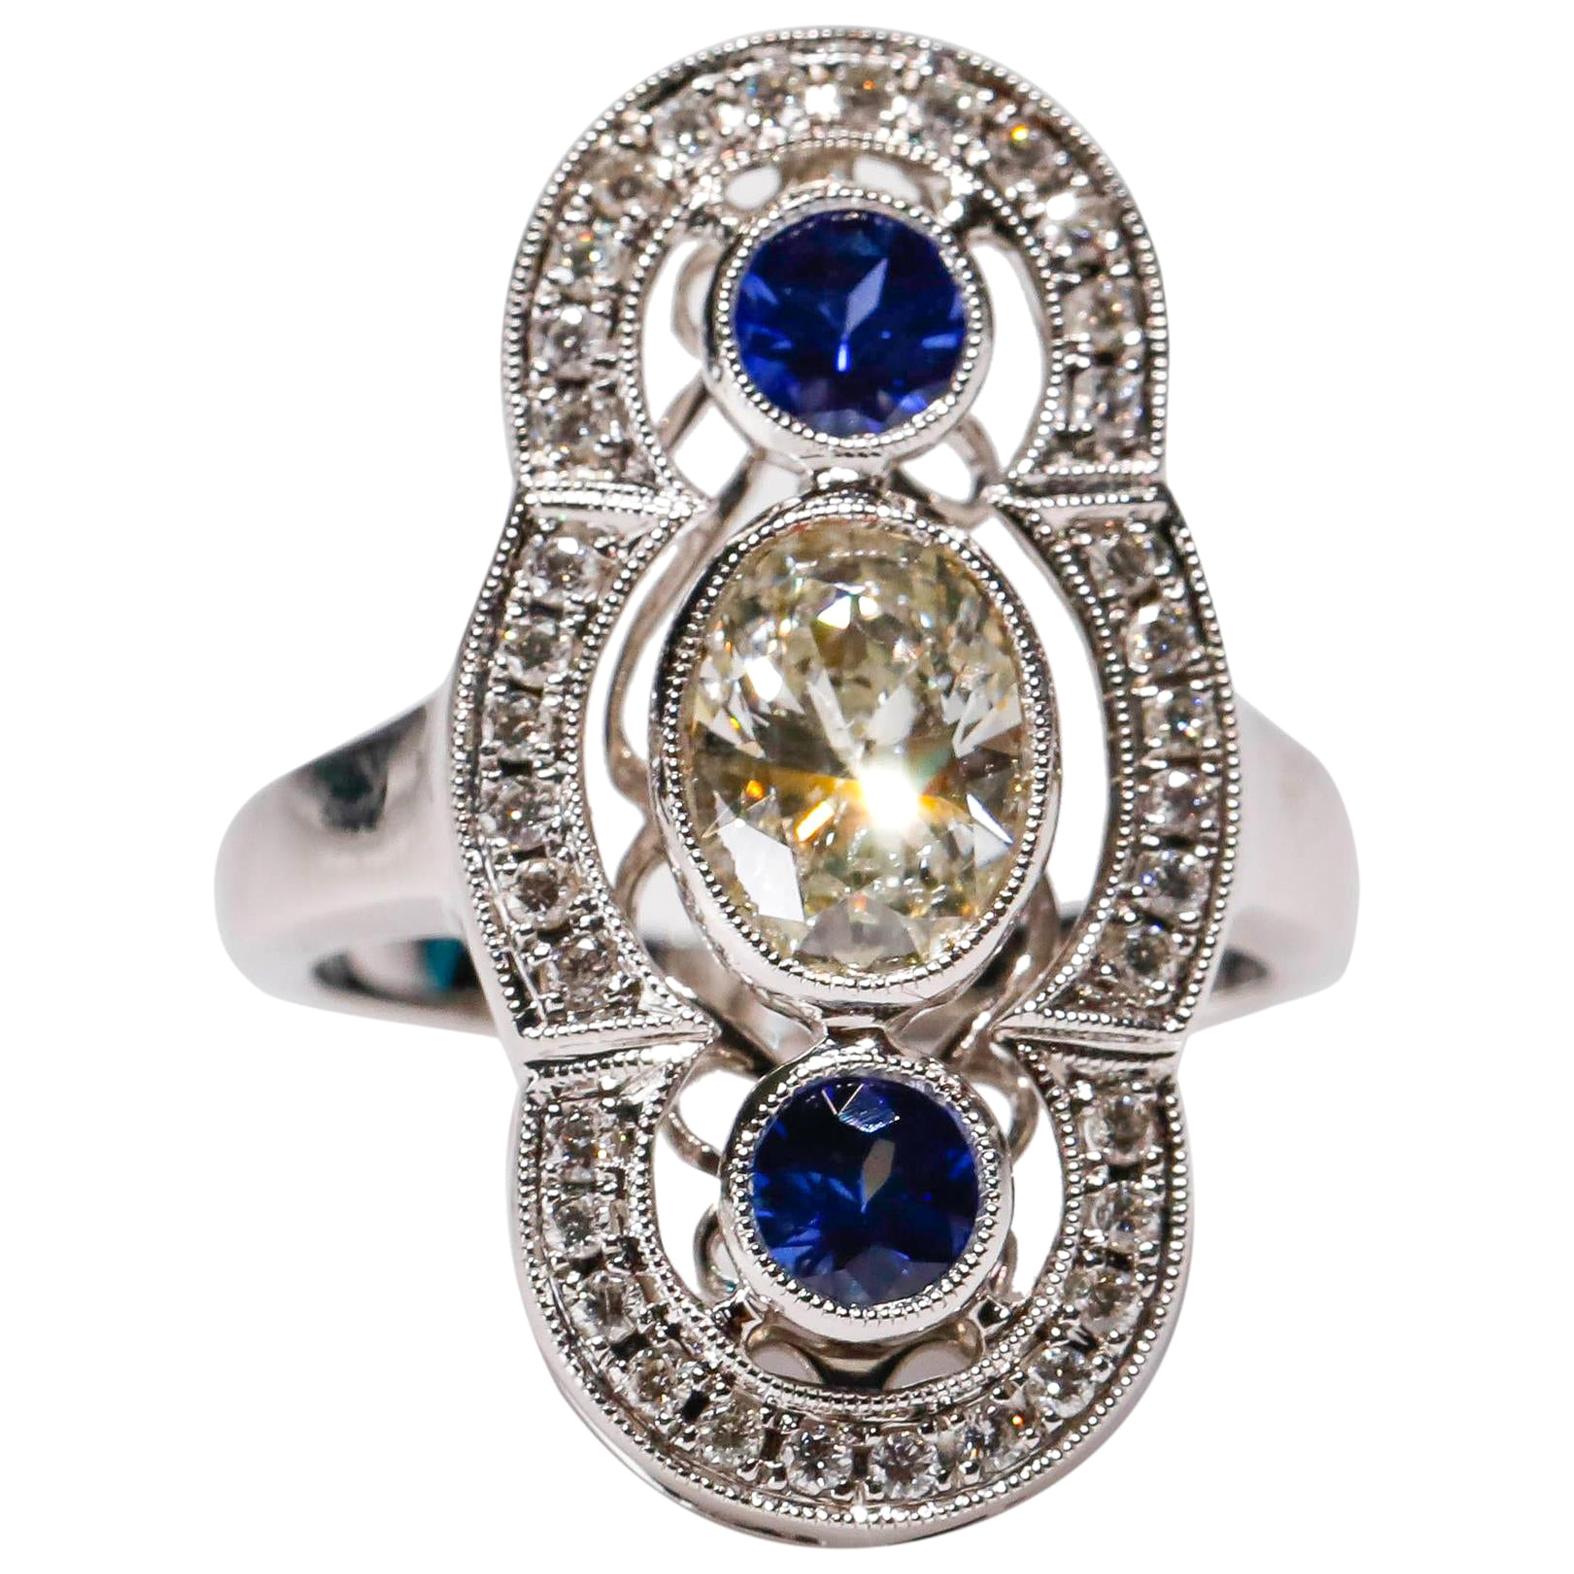 18 kt White Gold 0.52 Ct Blue Sapphire 1.30 Ct Oval White Diamond Long Ring

Crafted in 18 kt White Gold, this Unique design showcases a Blue Sapphire 0.93 TCW Oval shaped Sapphire, set in a halo of round-cut mesmerizing diamonds, Polished to a